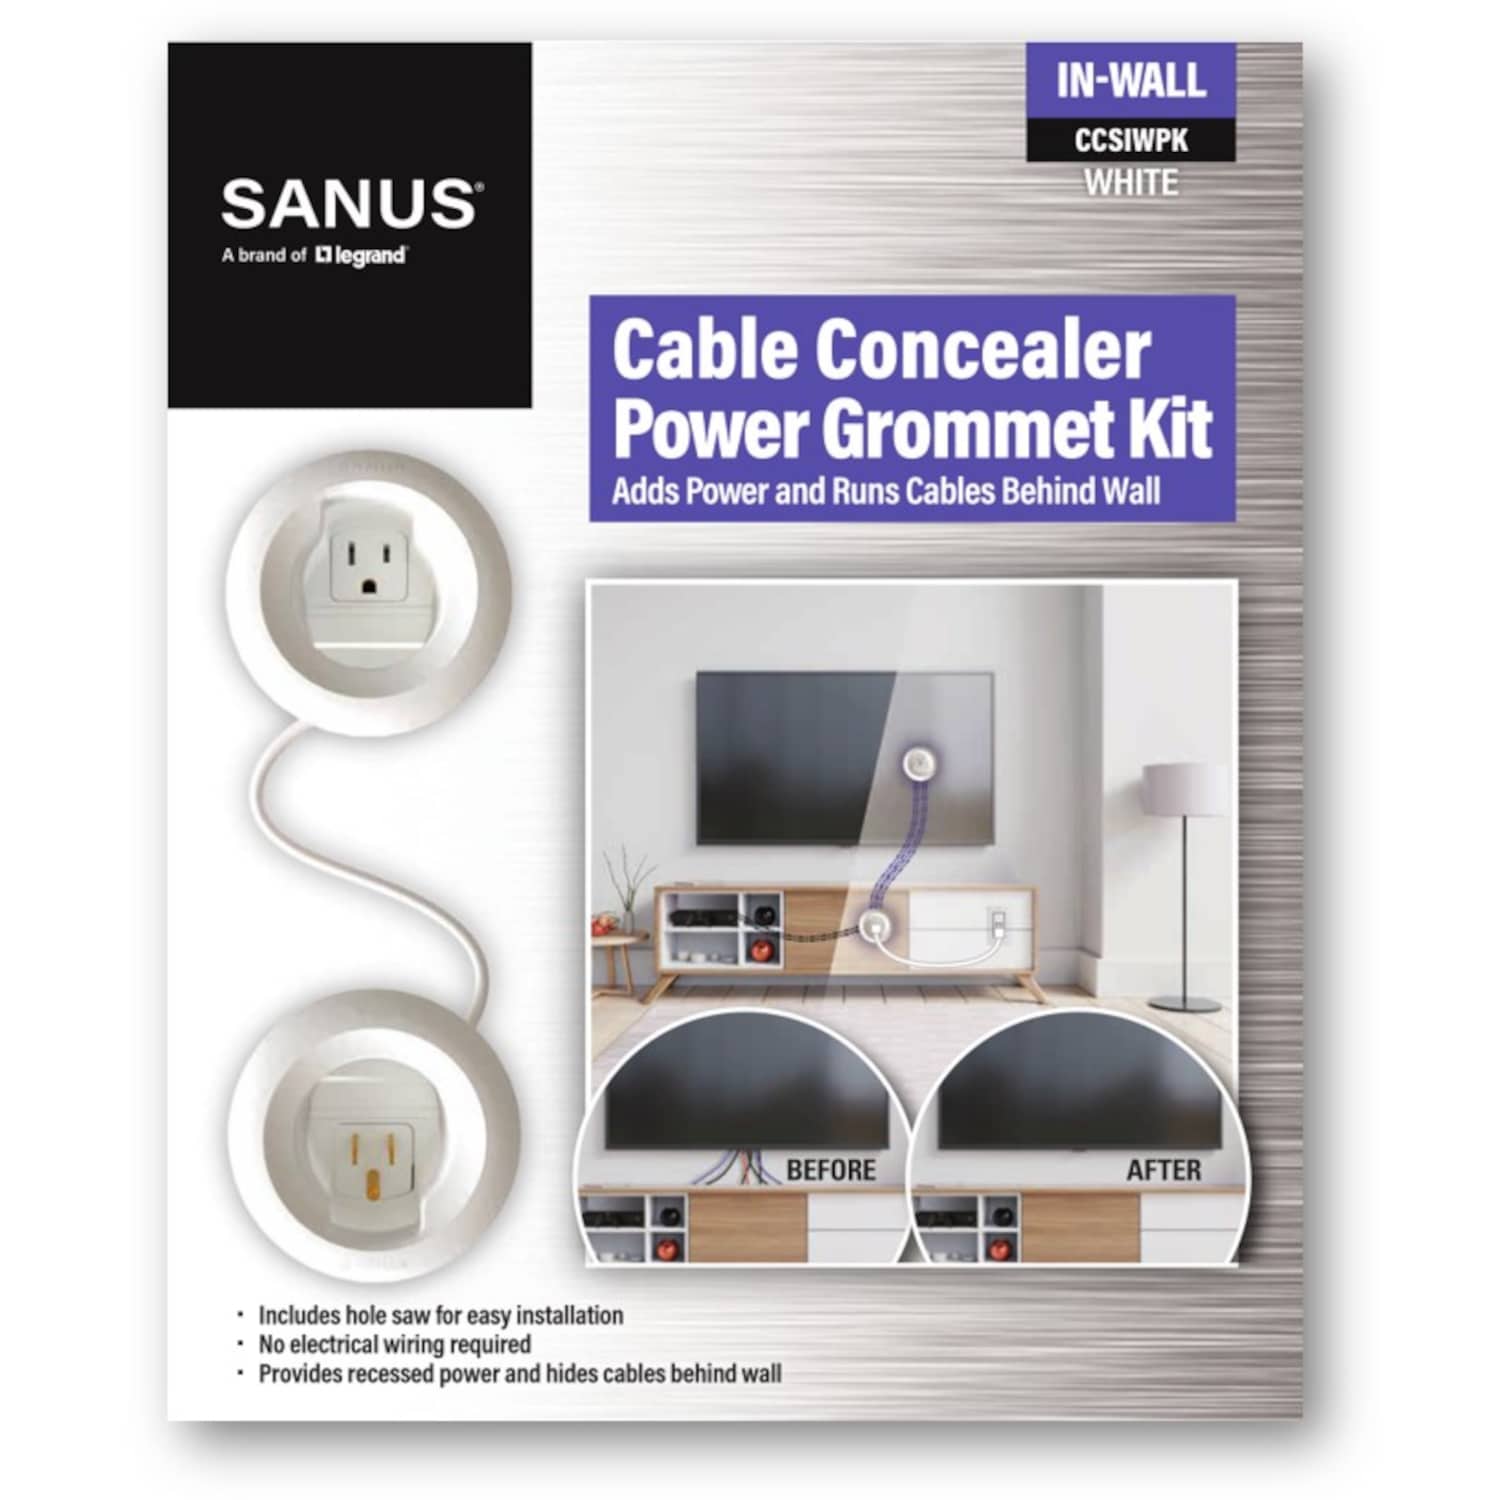 Sanus On-Wall Cable Concealer Kit for Mounted TVs - White - 1 Each